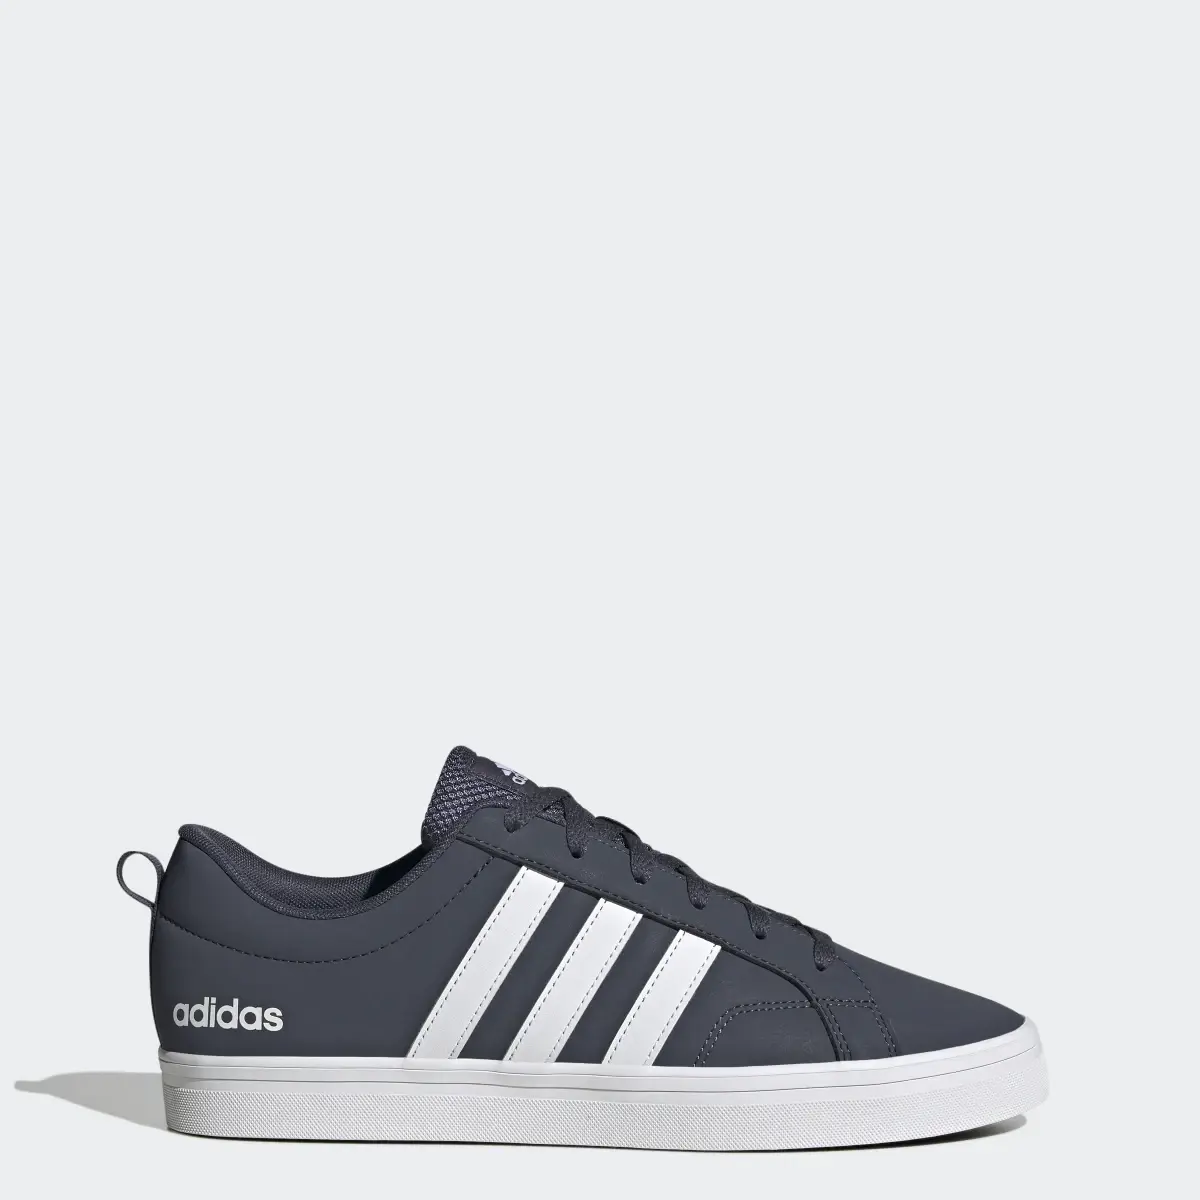 Adidas VS Pace 2.0 Lifestyle Skateboarding Shoes. 1